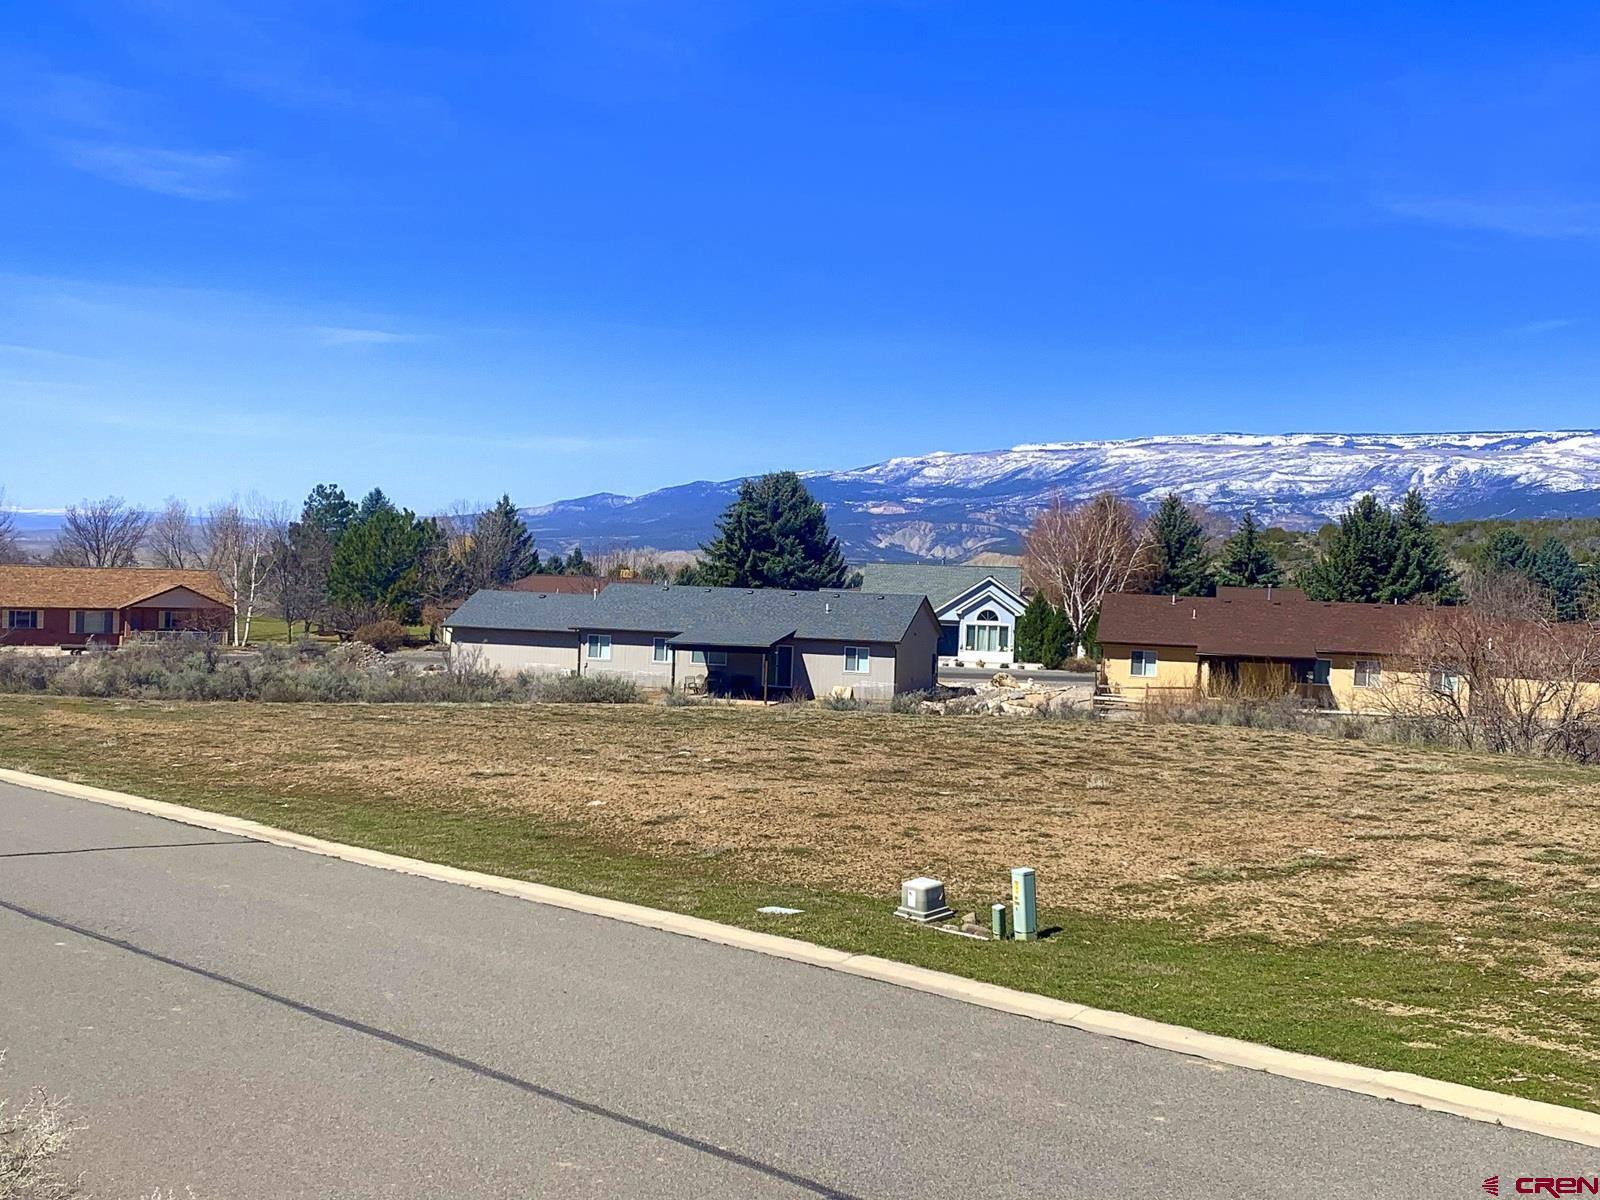 Surrounded by the beautiful Grand Mesa, this desirable lot located in Deer Creek Village is ready for your custom home!  A seasonal stream at the back of the property and an undeveloped hillside across the street allows for enjoyment of nature.  Nearly a half acre lot with good grade for your building site.  Electricity and fiber optic cable are near lot line, with water and sewer taps available.  Walking distance to Cedaredge Golf Club and Lucky Shot Bar & Grill.  Conveniently located to the town's amenities, including Surface Creek walking trail, grocery store, gas station, restaurants and downtown shops, as well as Grand Mesa Arts and Events Center, plus year-round recreation on Grand Mesa.  It's easy to fall in love with this area.  Come on home!